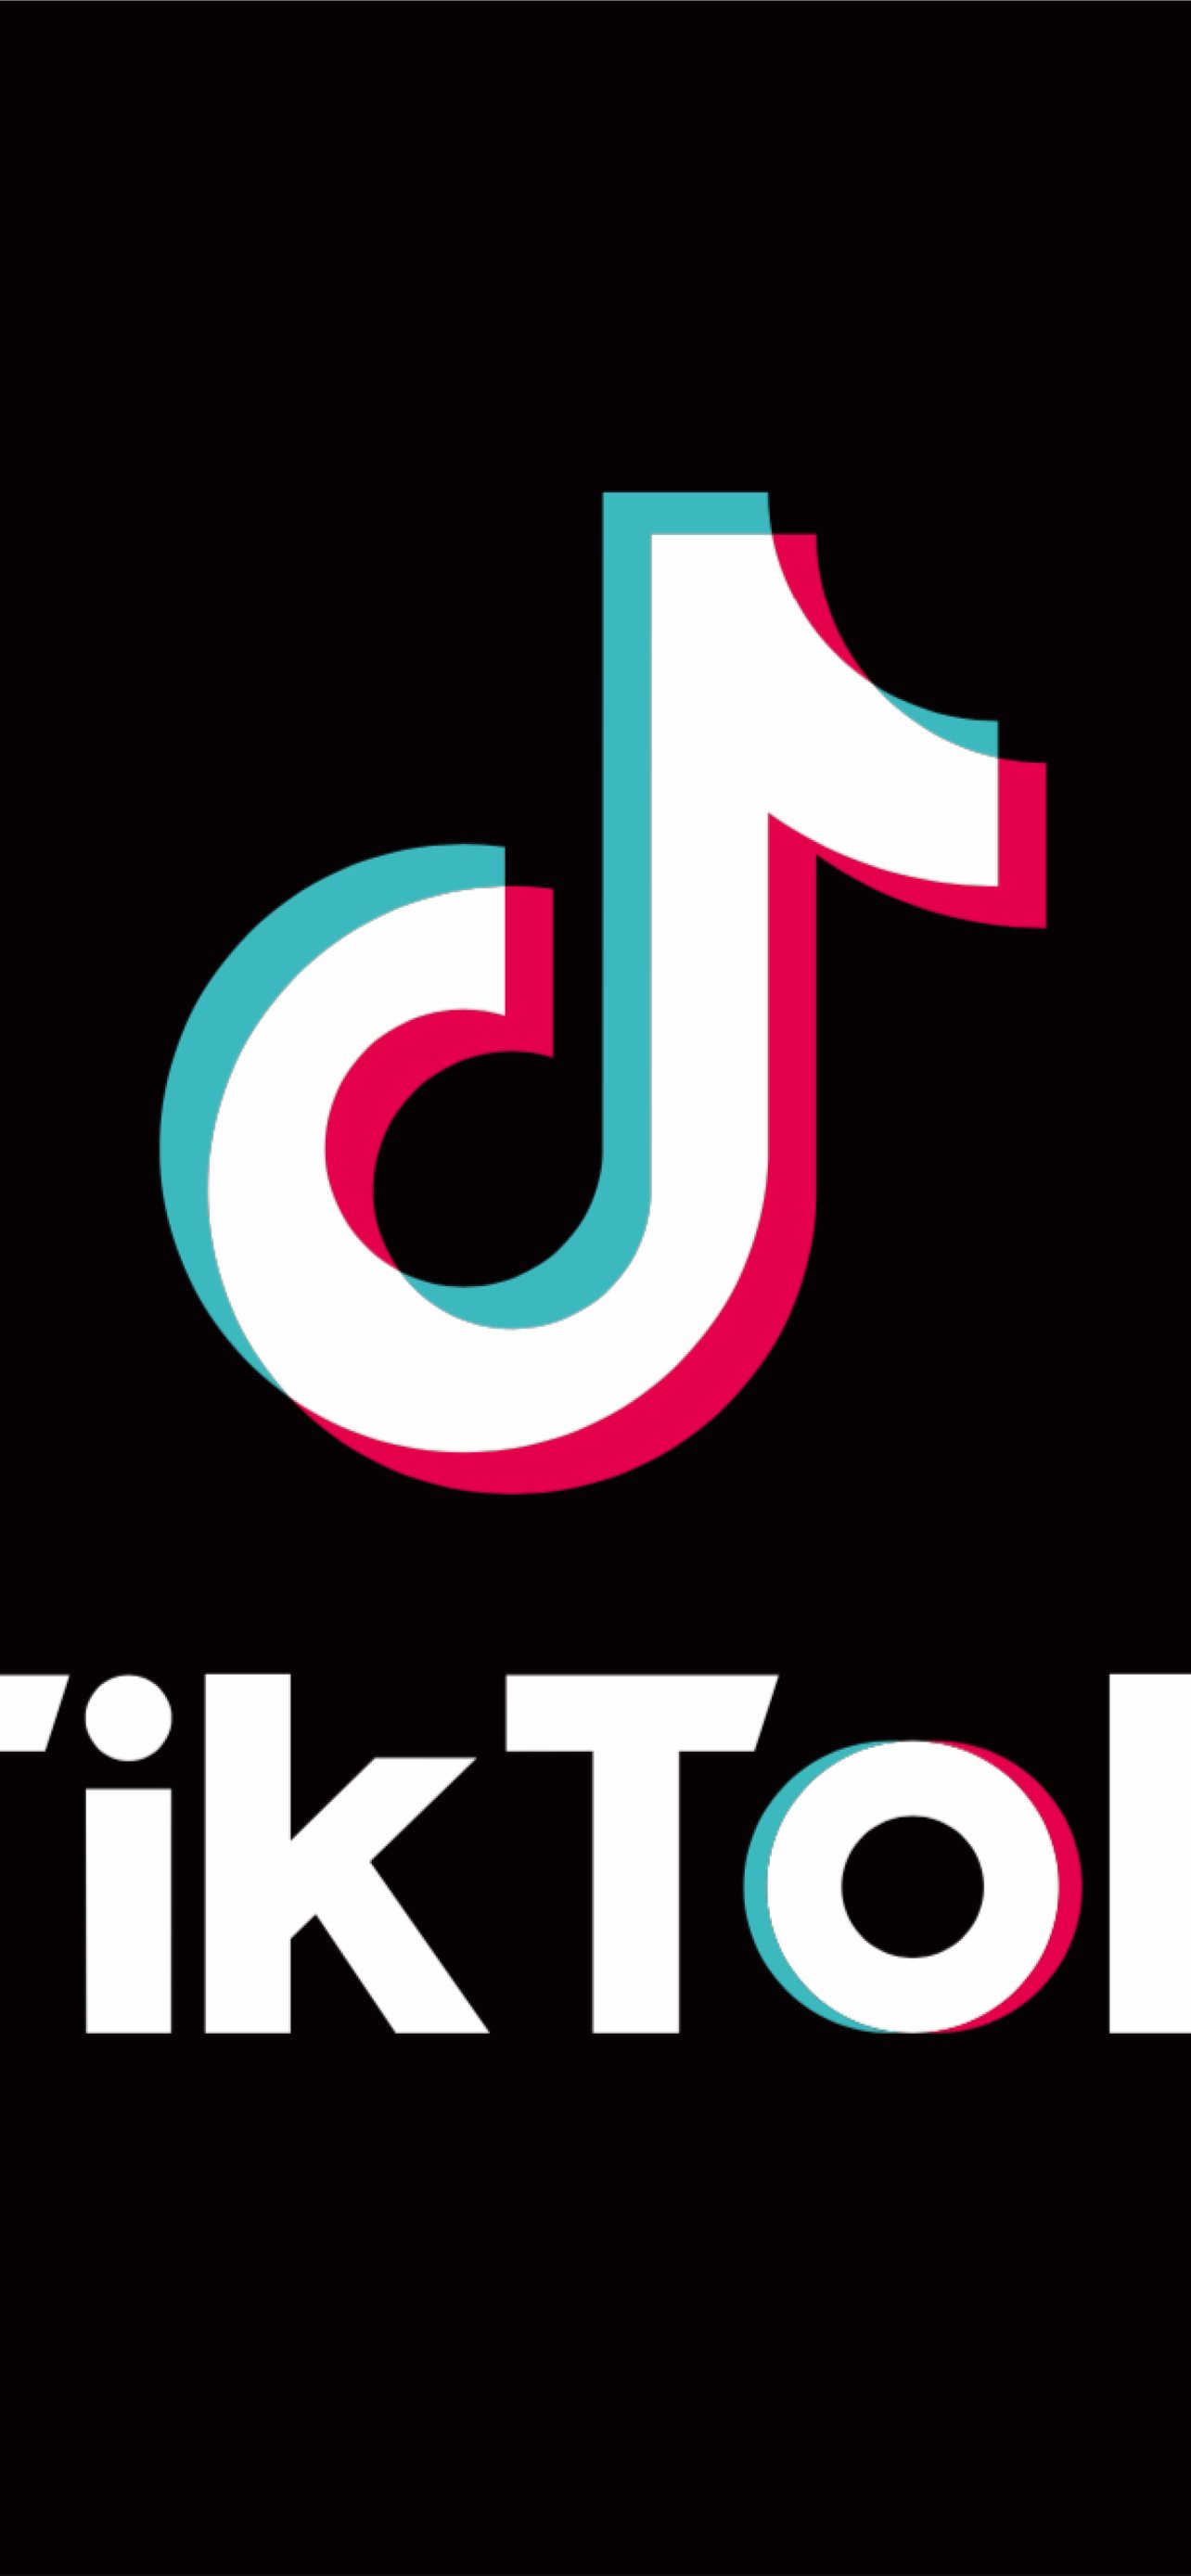 8 iPhone Wallpapers Inspired by Viral TikTok Sounds  No Repeats or  Hesitations